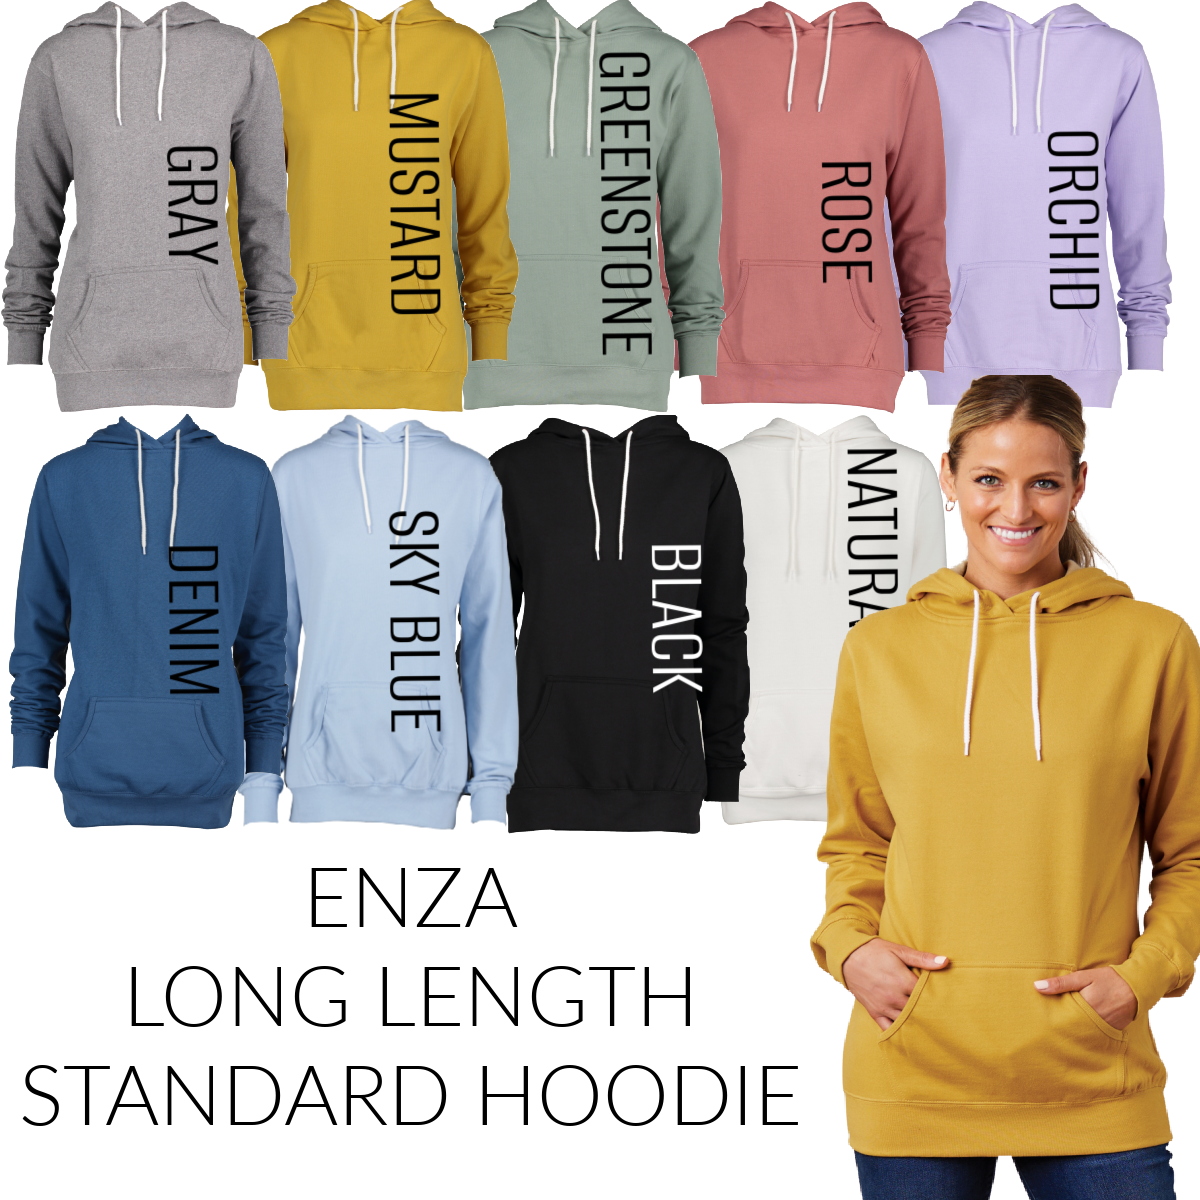 Game Changer Therapy Services - Ladies Longer Length Hoodie